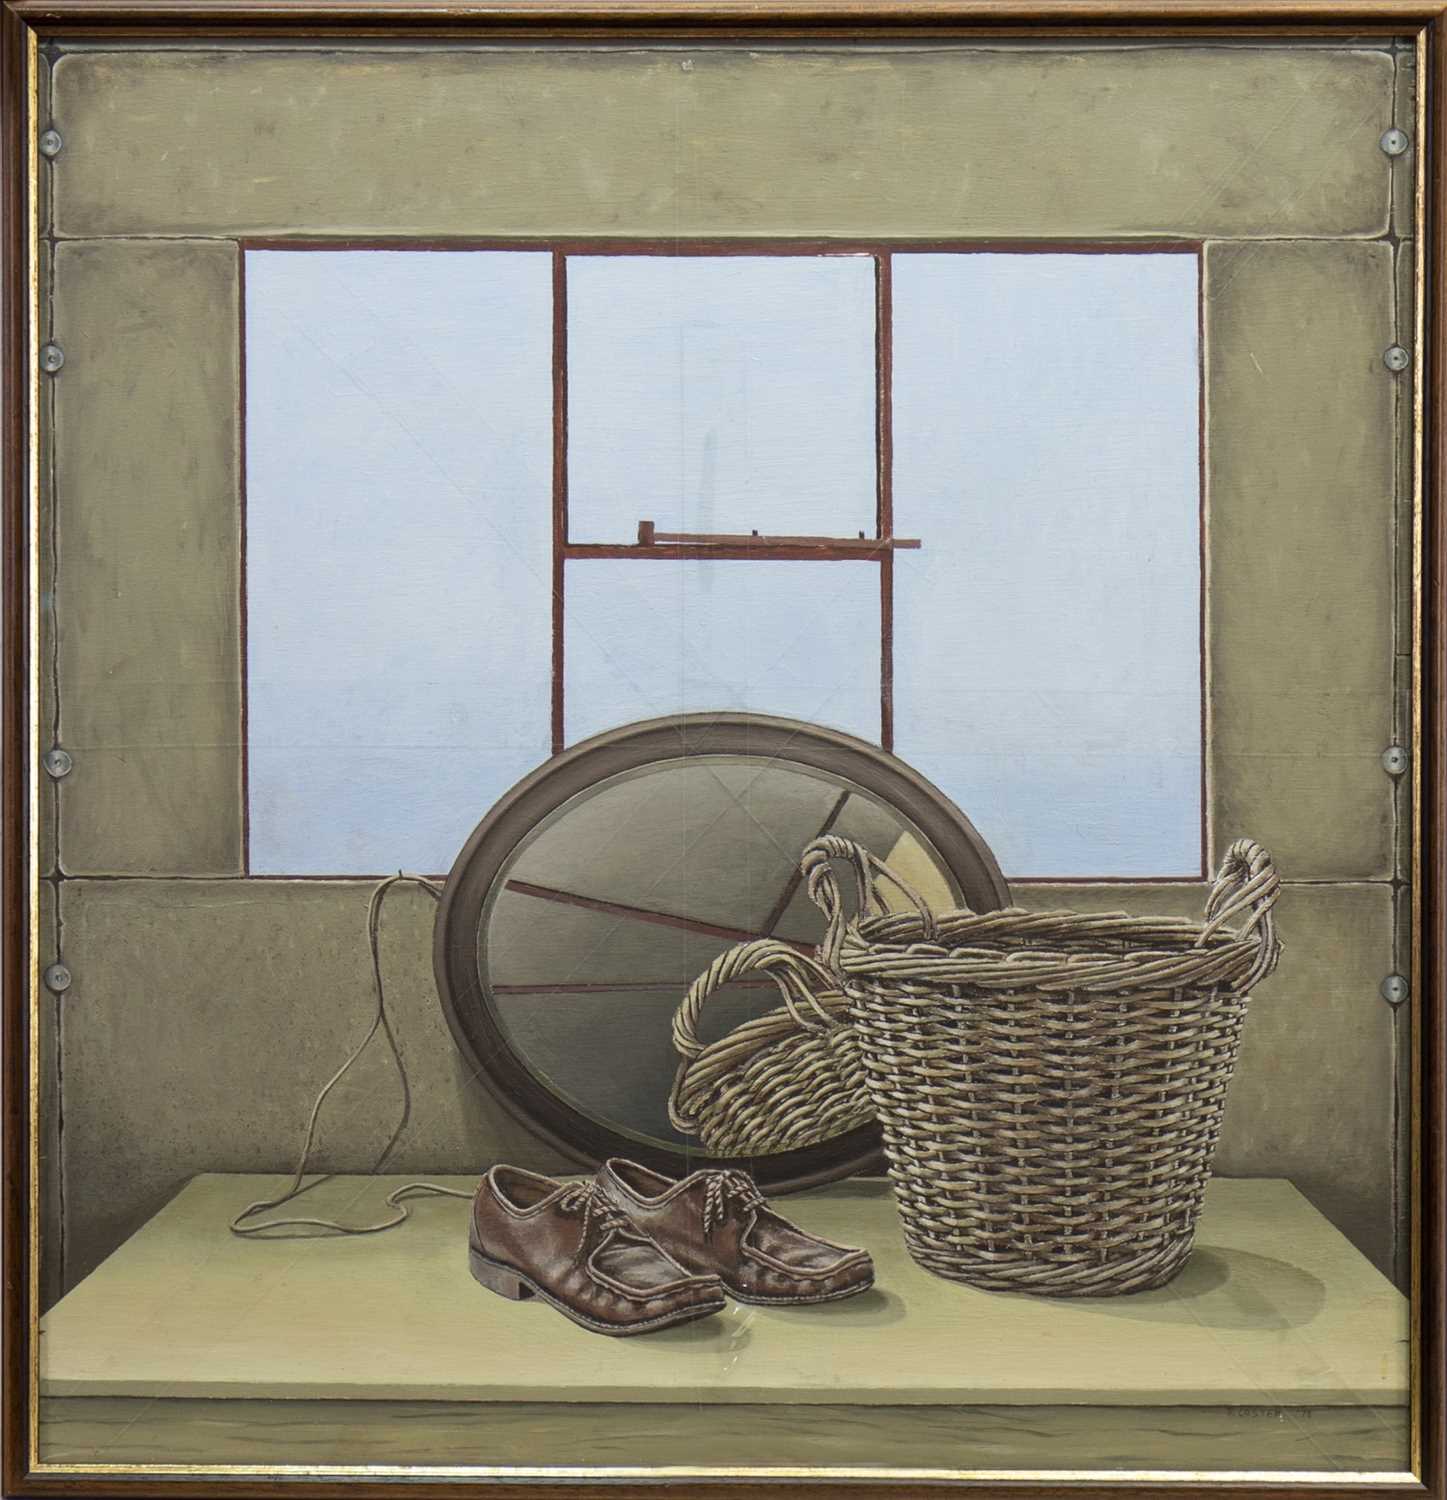 Lot 531 - ROYAL ACADEMY EXHIBITED  - STILL LIFE WITH SHOES, BY DAVID COSTER